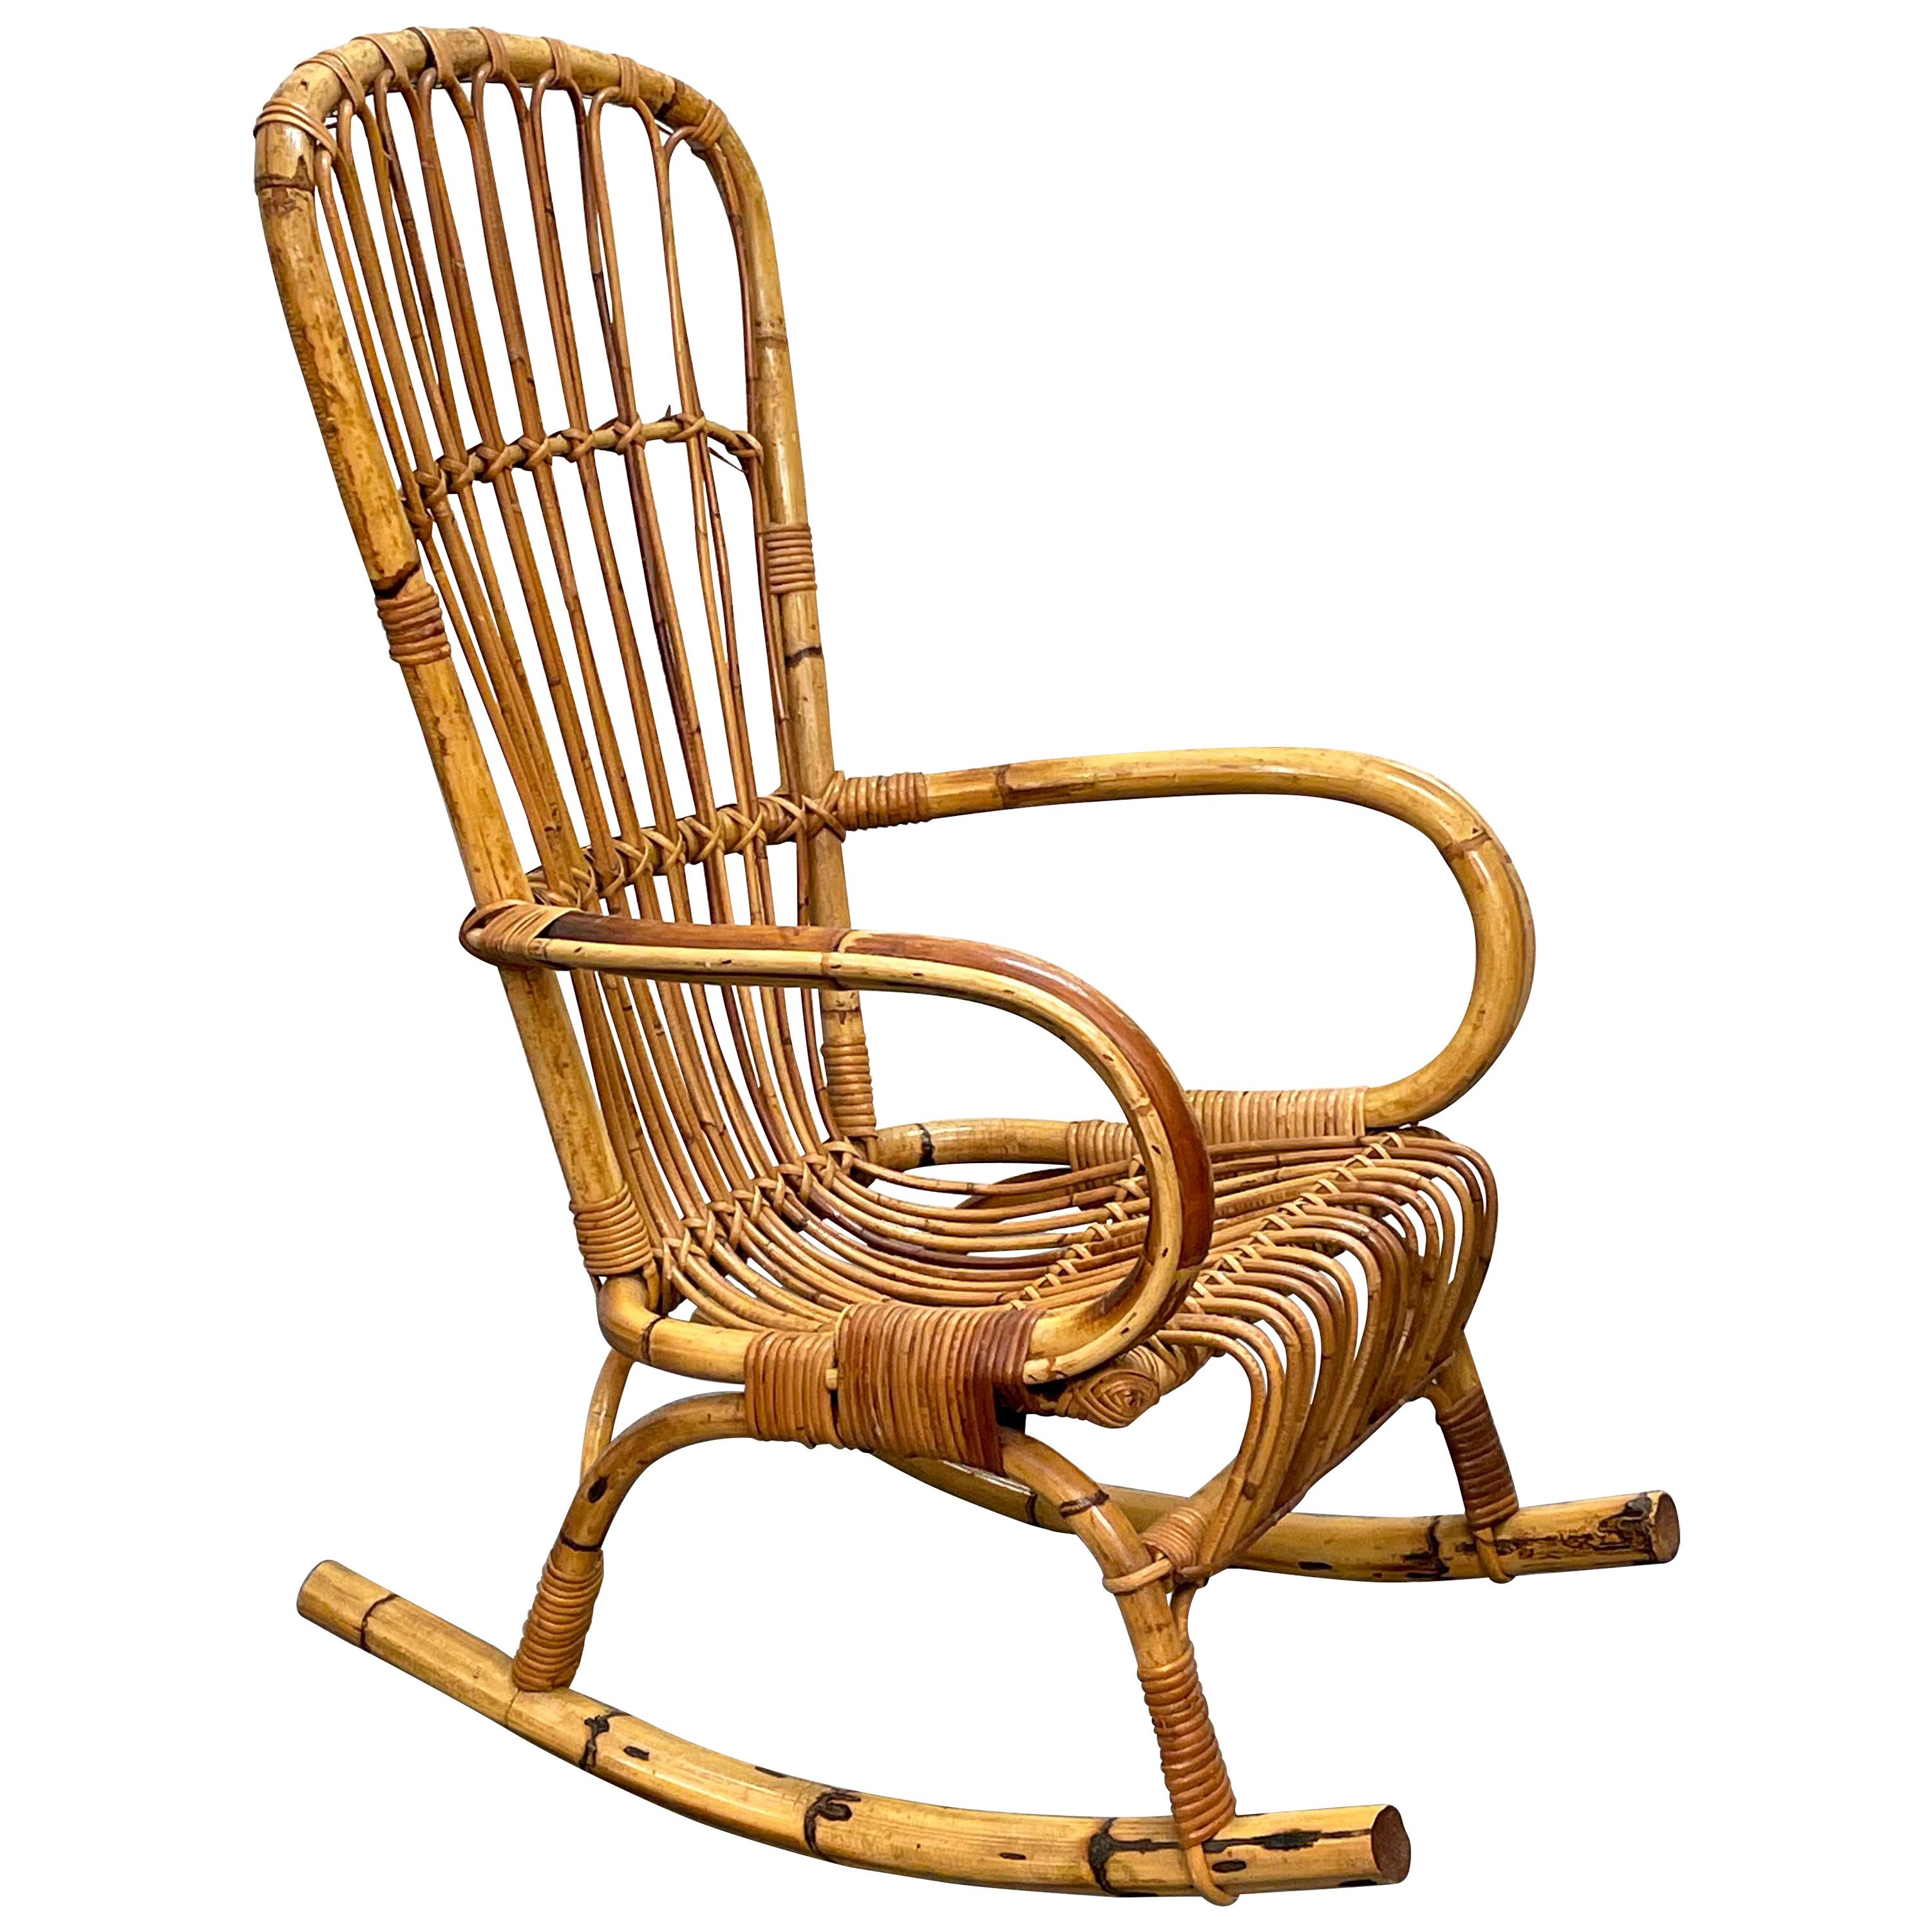 Midcentury French Riviera Rattan and Bamboo Italian Rocking Chair, 1960s For Sale